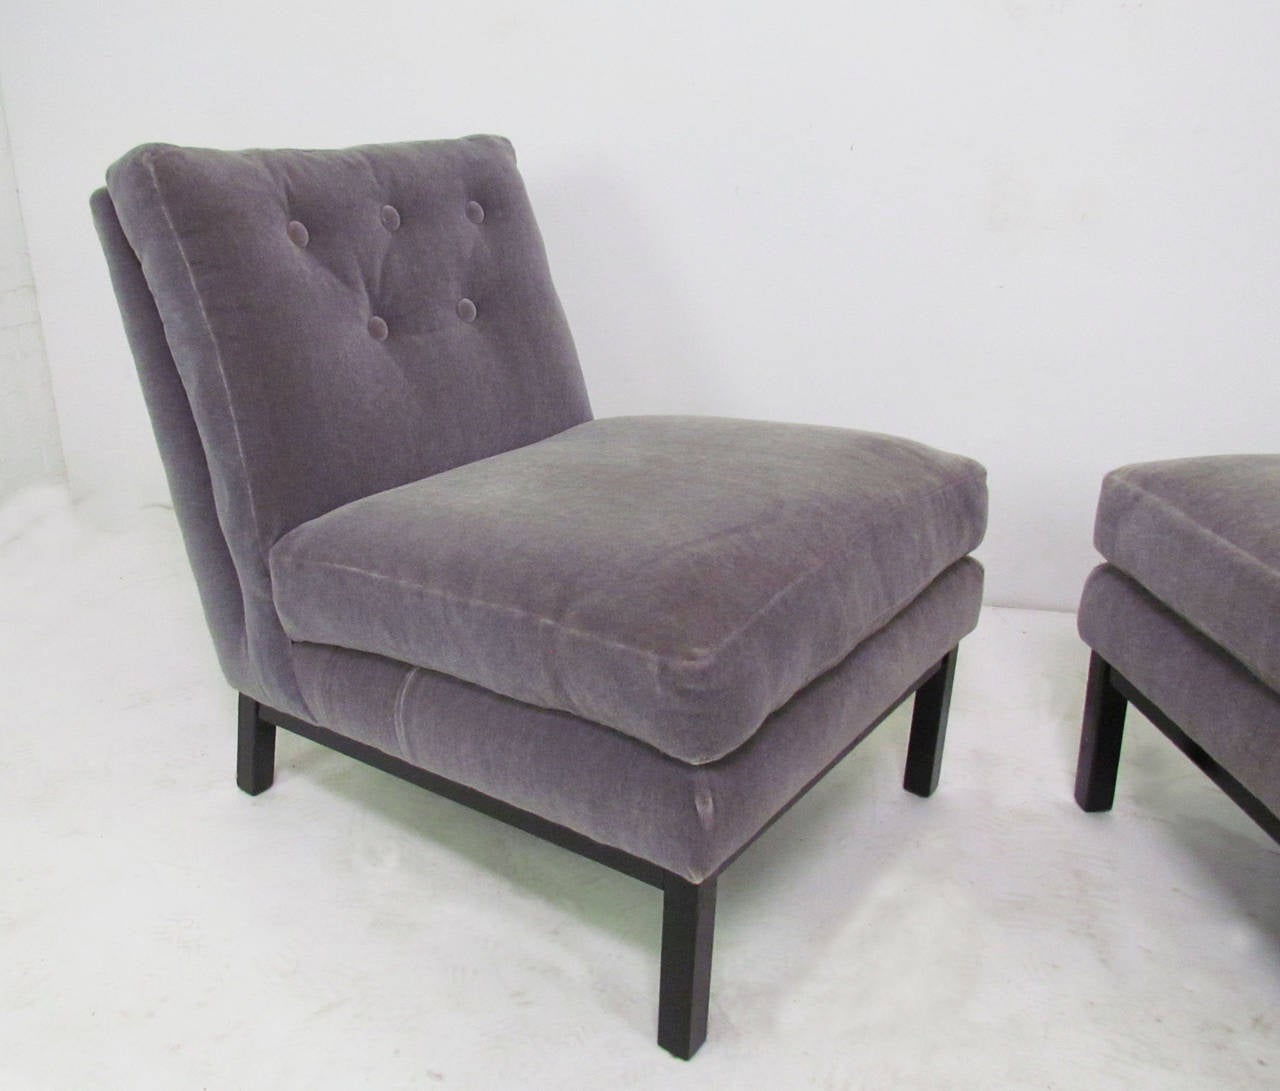 Pair of slipper lounge chairs by Harvey Probber, circa 1960s. Black lacquered wood bases, newer mohair upholstery.